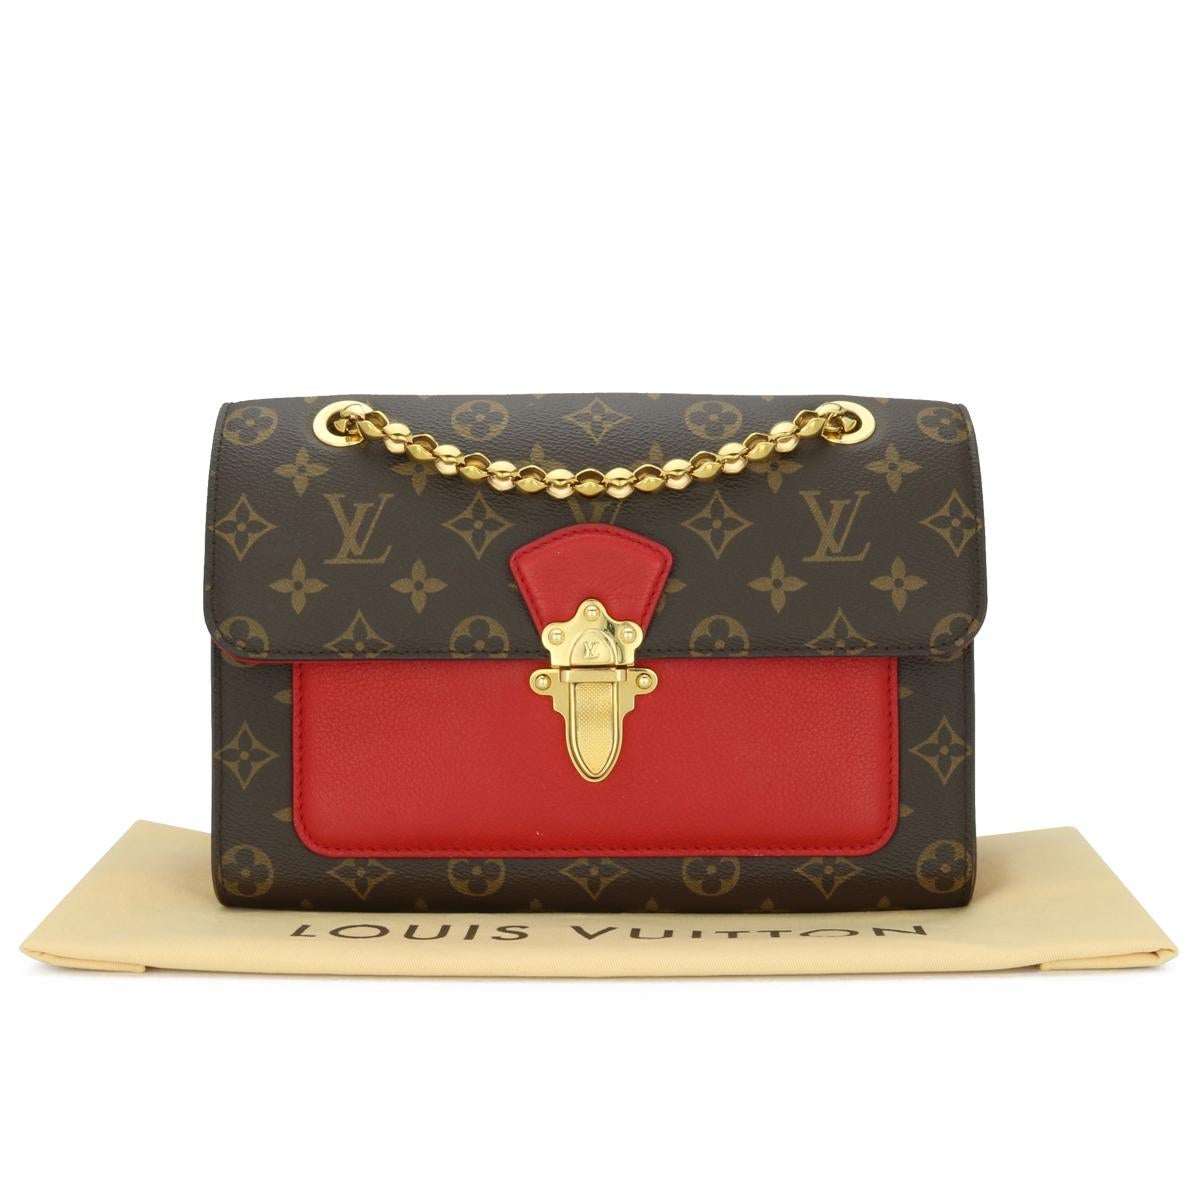 Louis Vuitton Victoire Monogram Bag with Cherry Red Interior with Gold-Tone Hardware 2016.

This bag is in good condition.

- Exterior Condition: Good condition. The outside of the bag shows general signs of wear -inking edges wear to four base